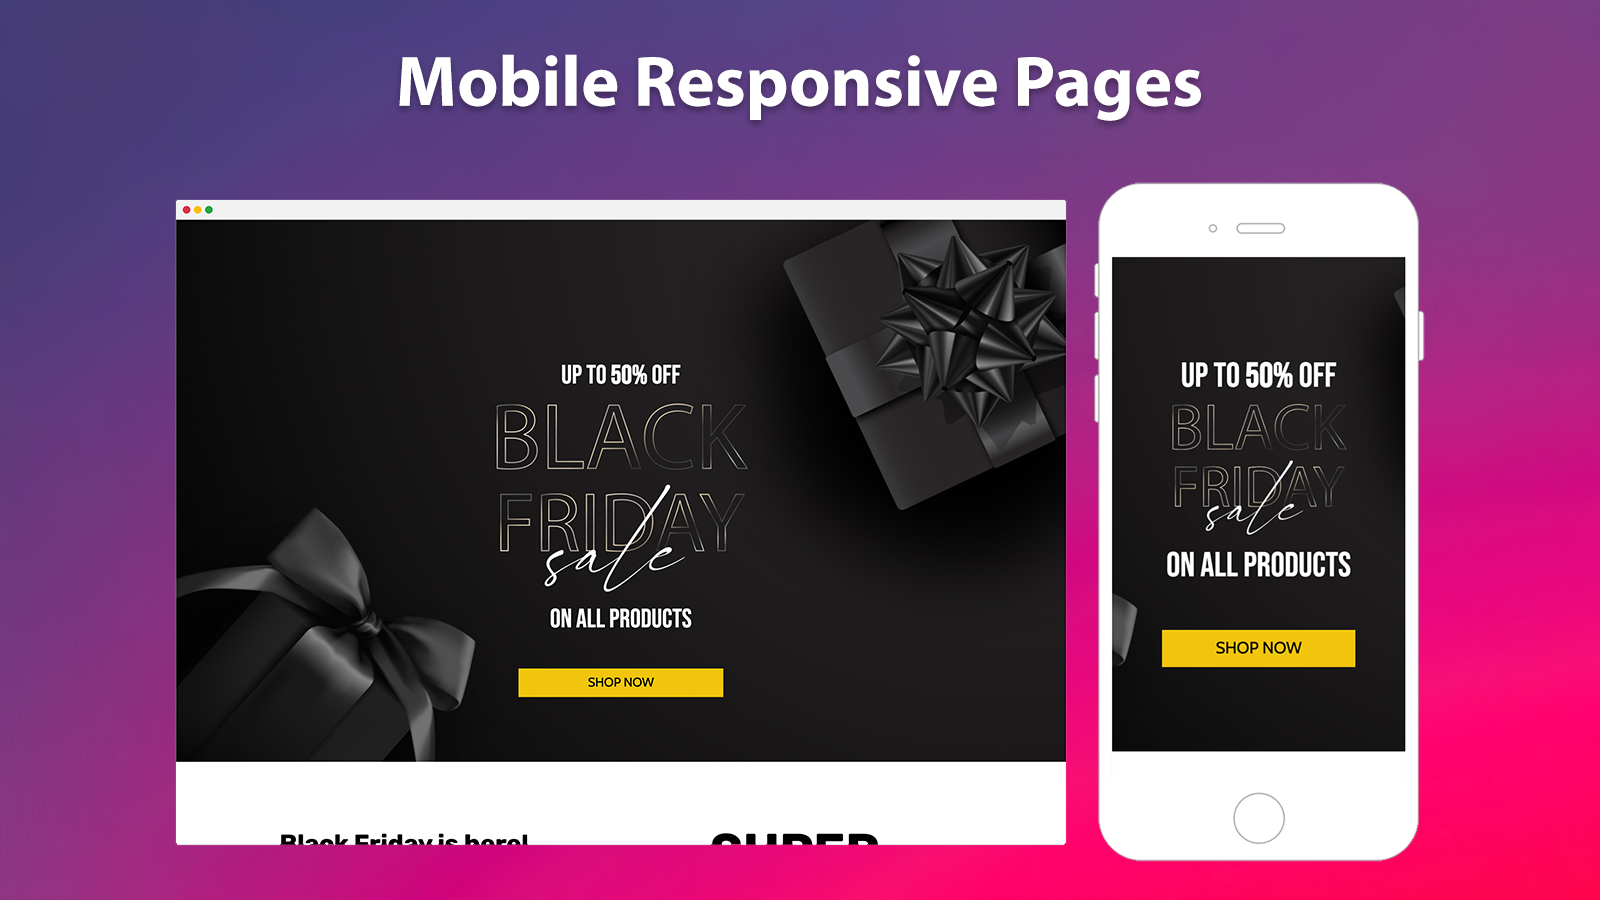 Mobile Responsive Pages